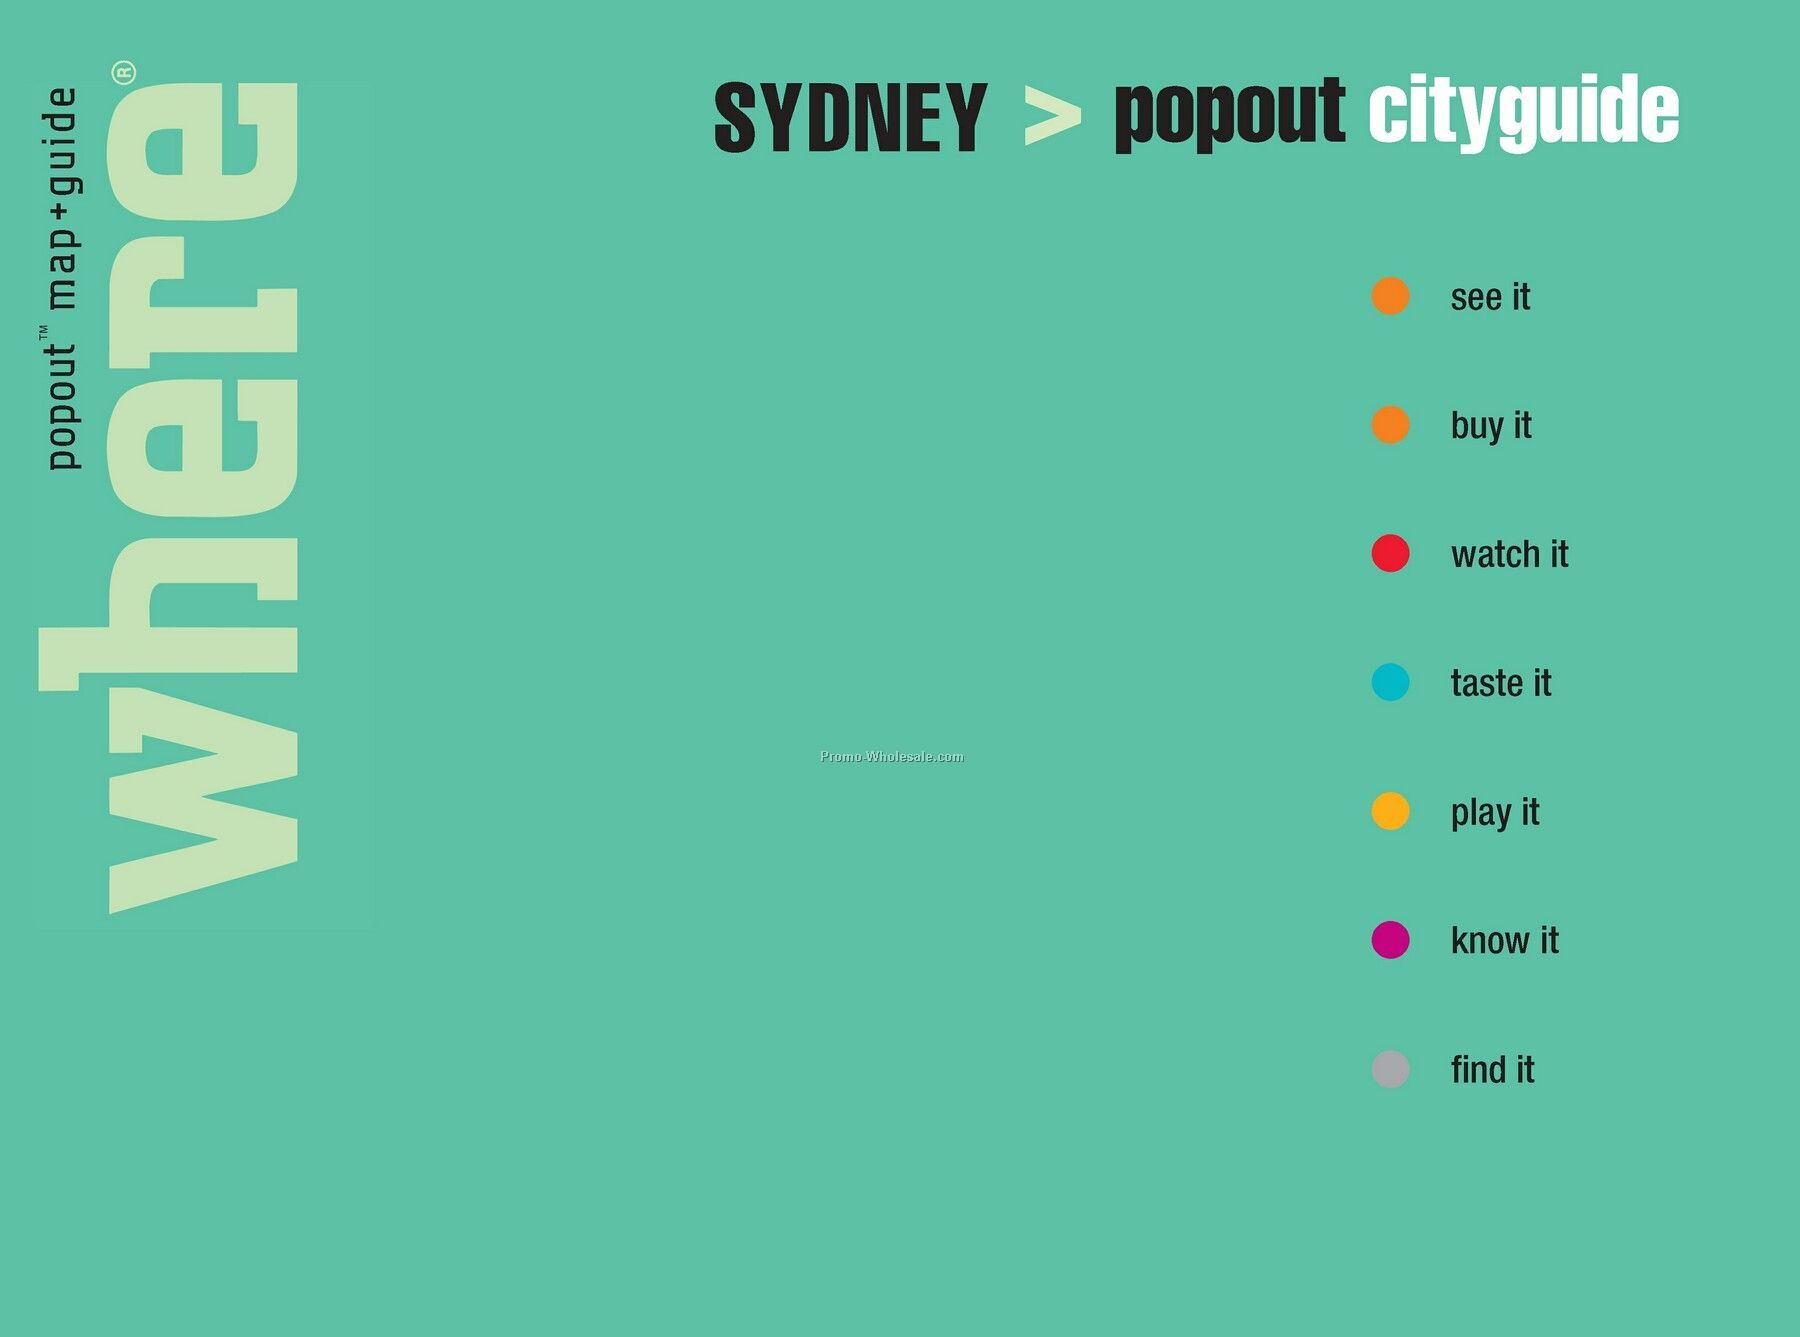 Travel Guides - International Guide Of Sydney - Featuring Popout Maps